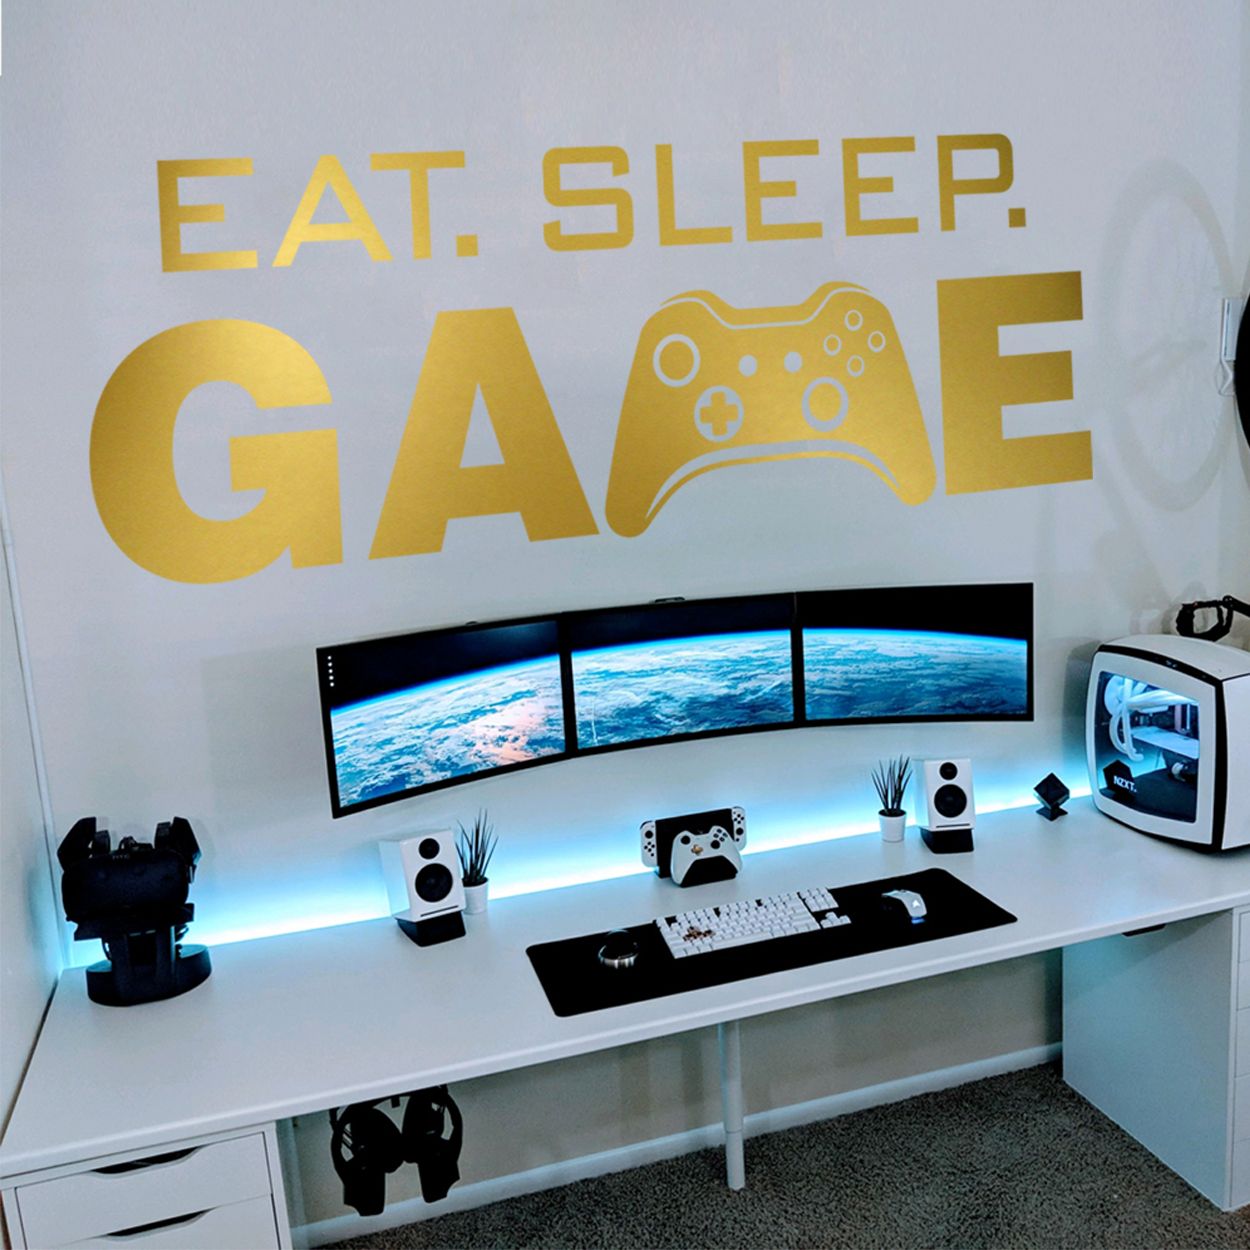 Eat sleep game stickers can be stuck to bedroom Wall IPAD CAR BAG LAP TOP 